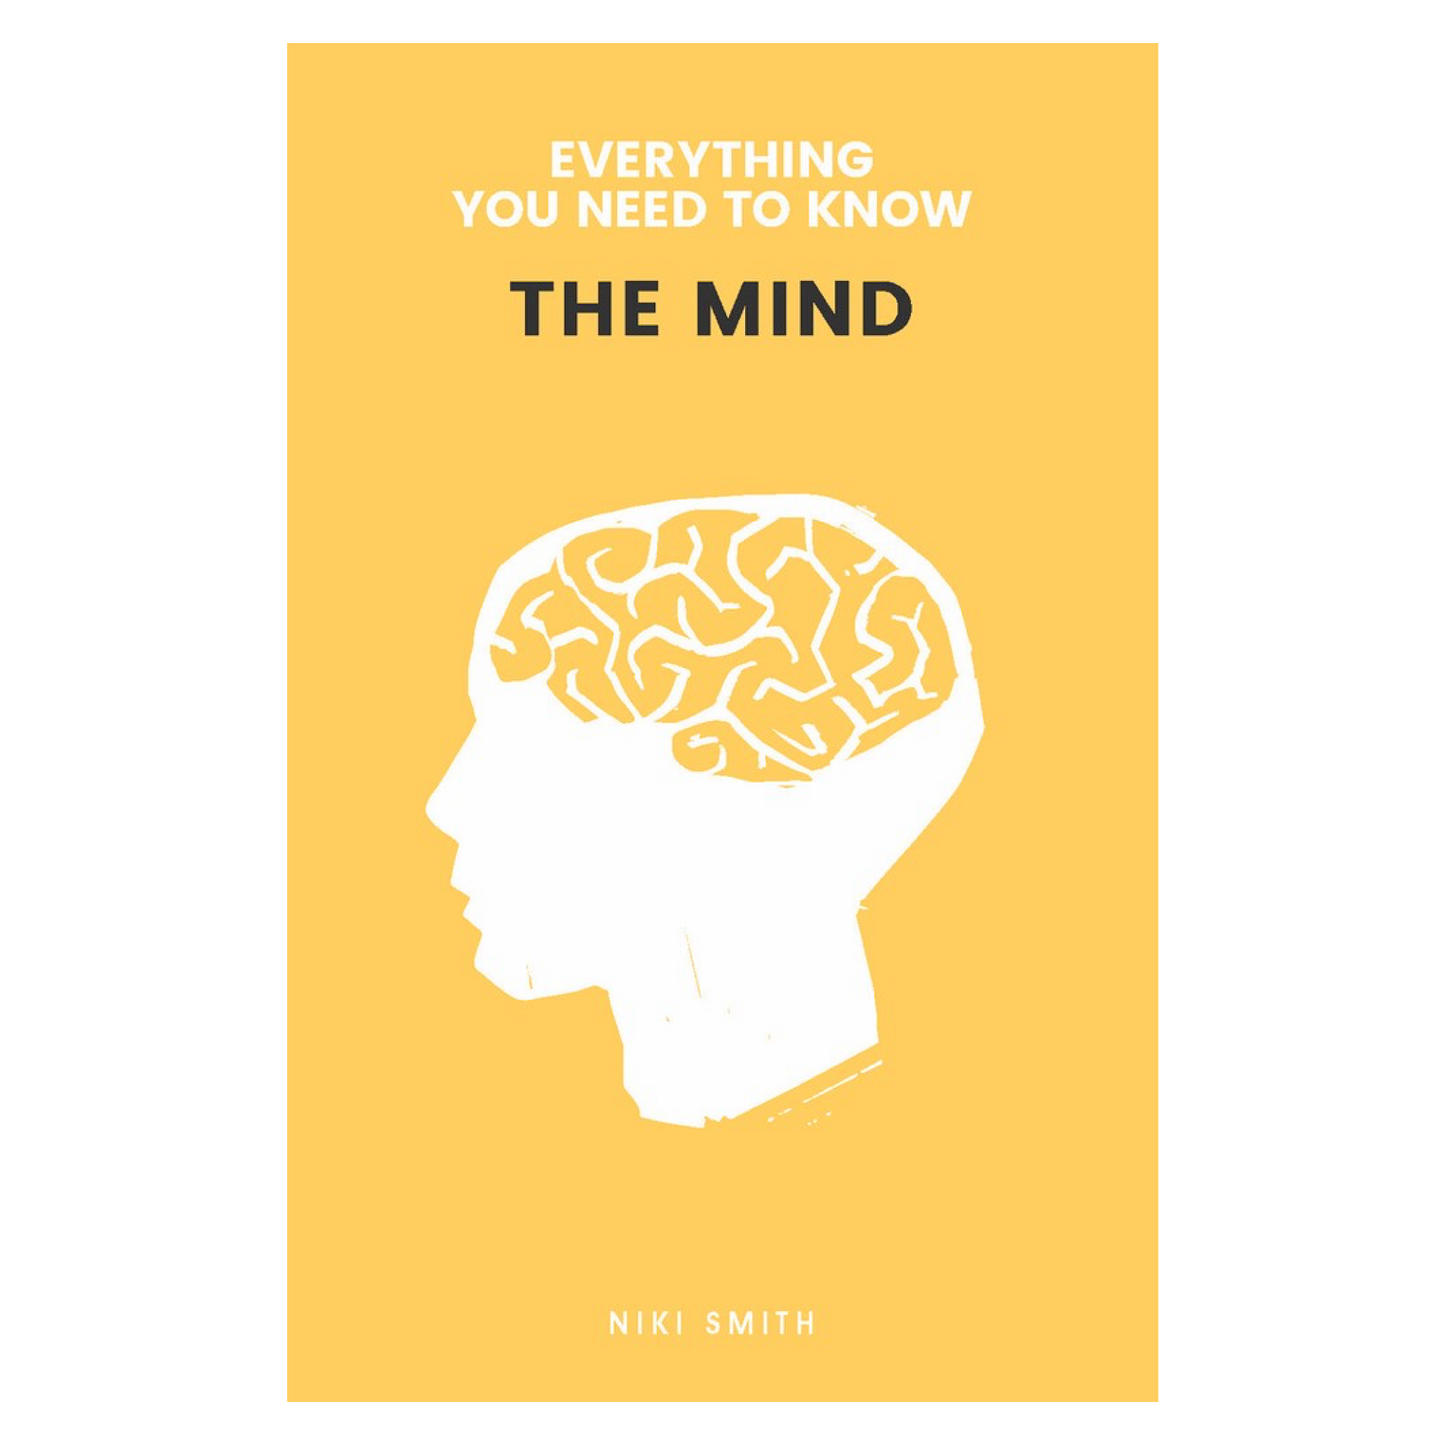 The Mind: Everything You Need to Know